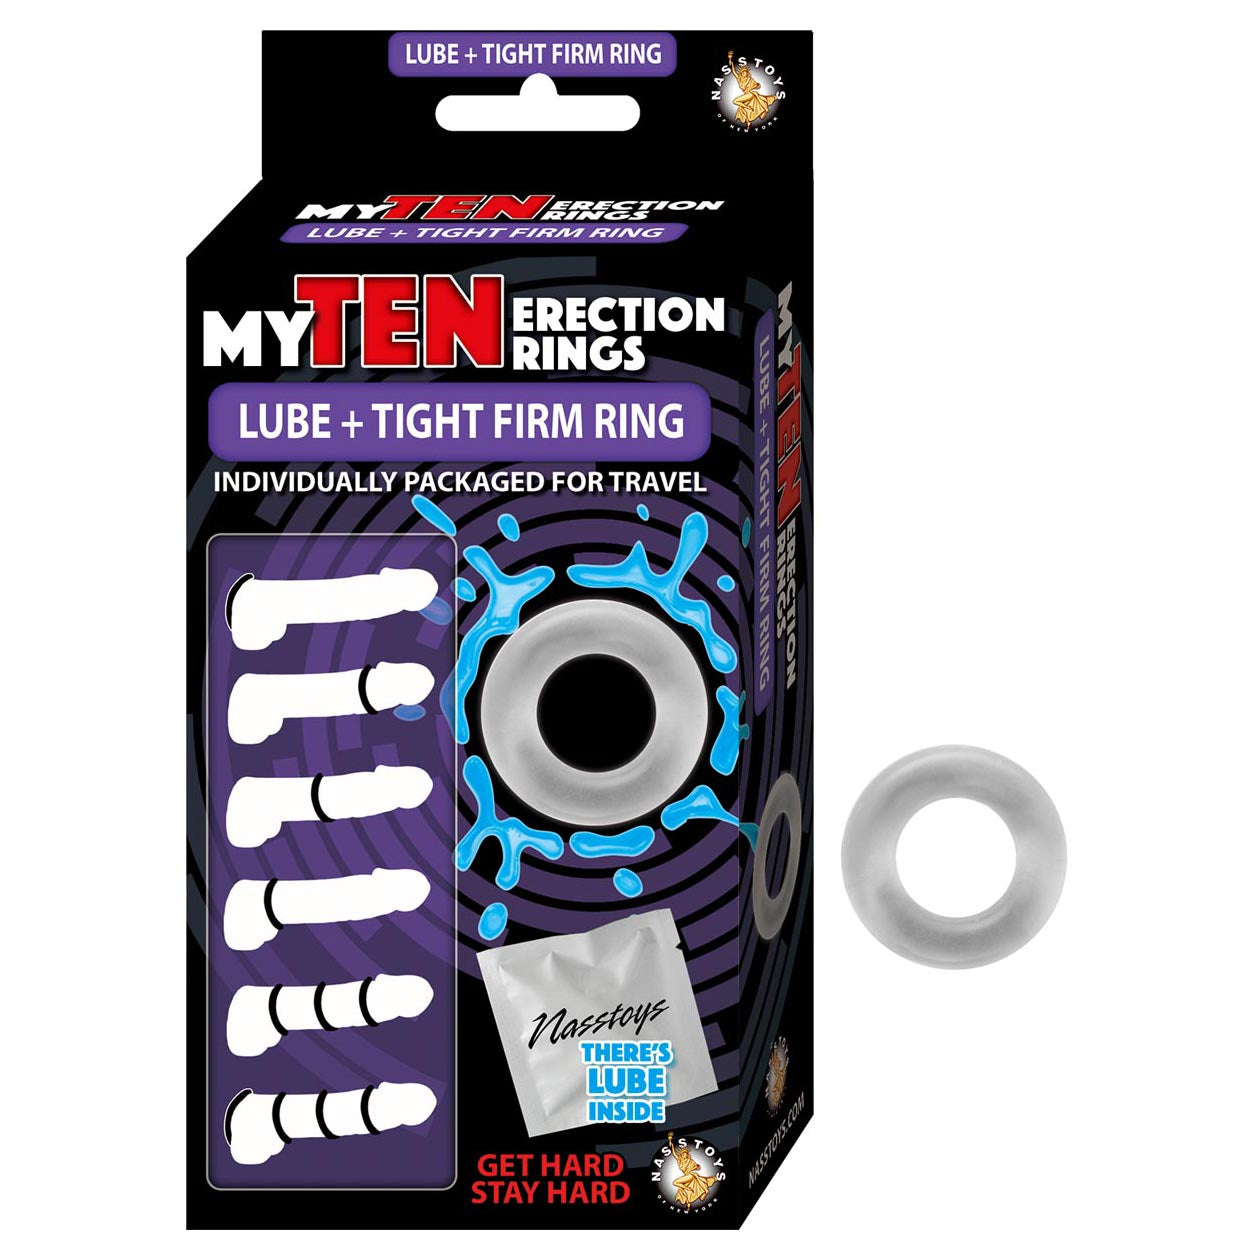 My Ten Erection Rings Lube + Tight Firm Ring-Clear